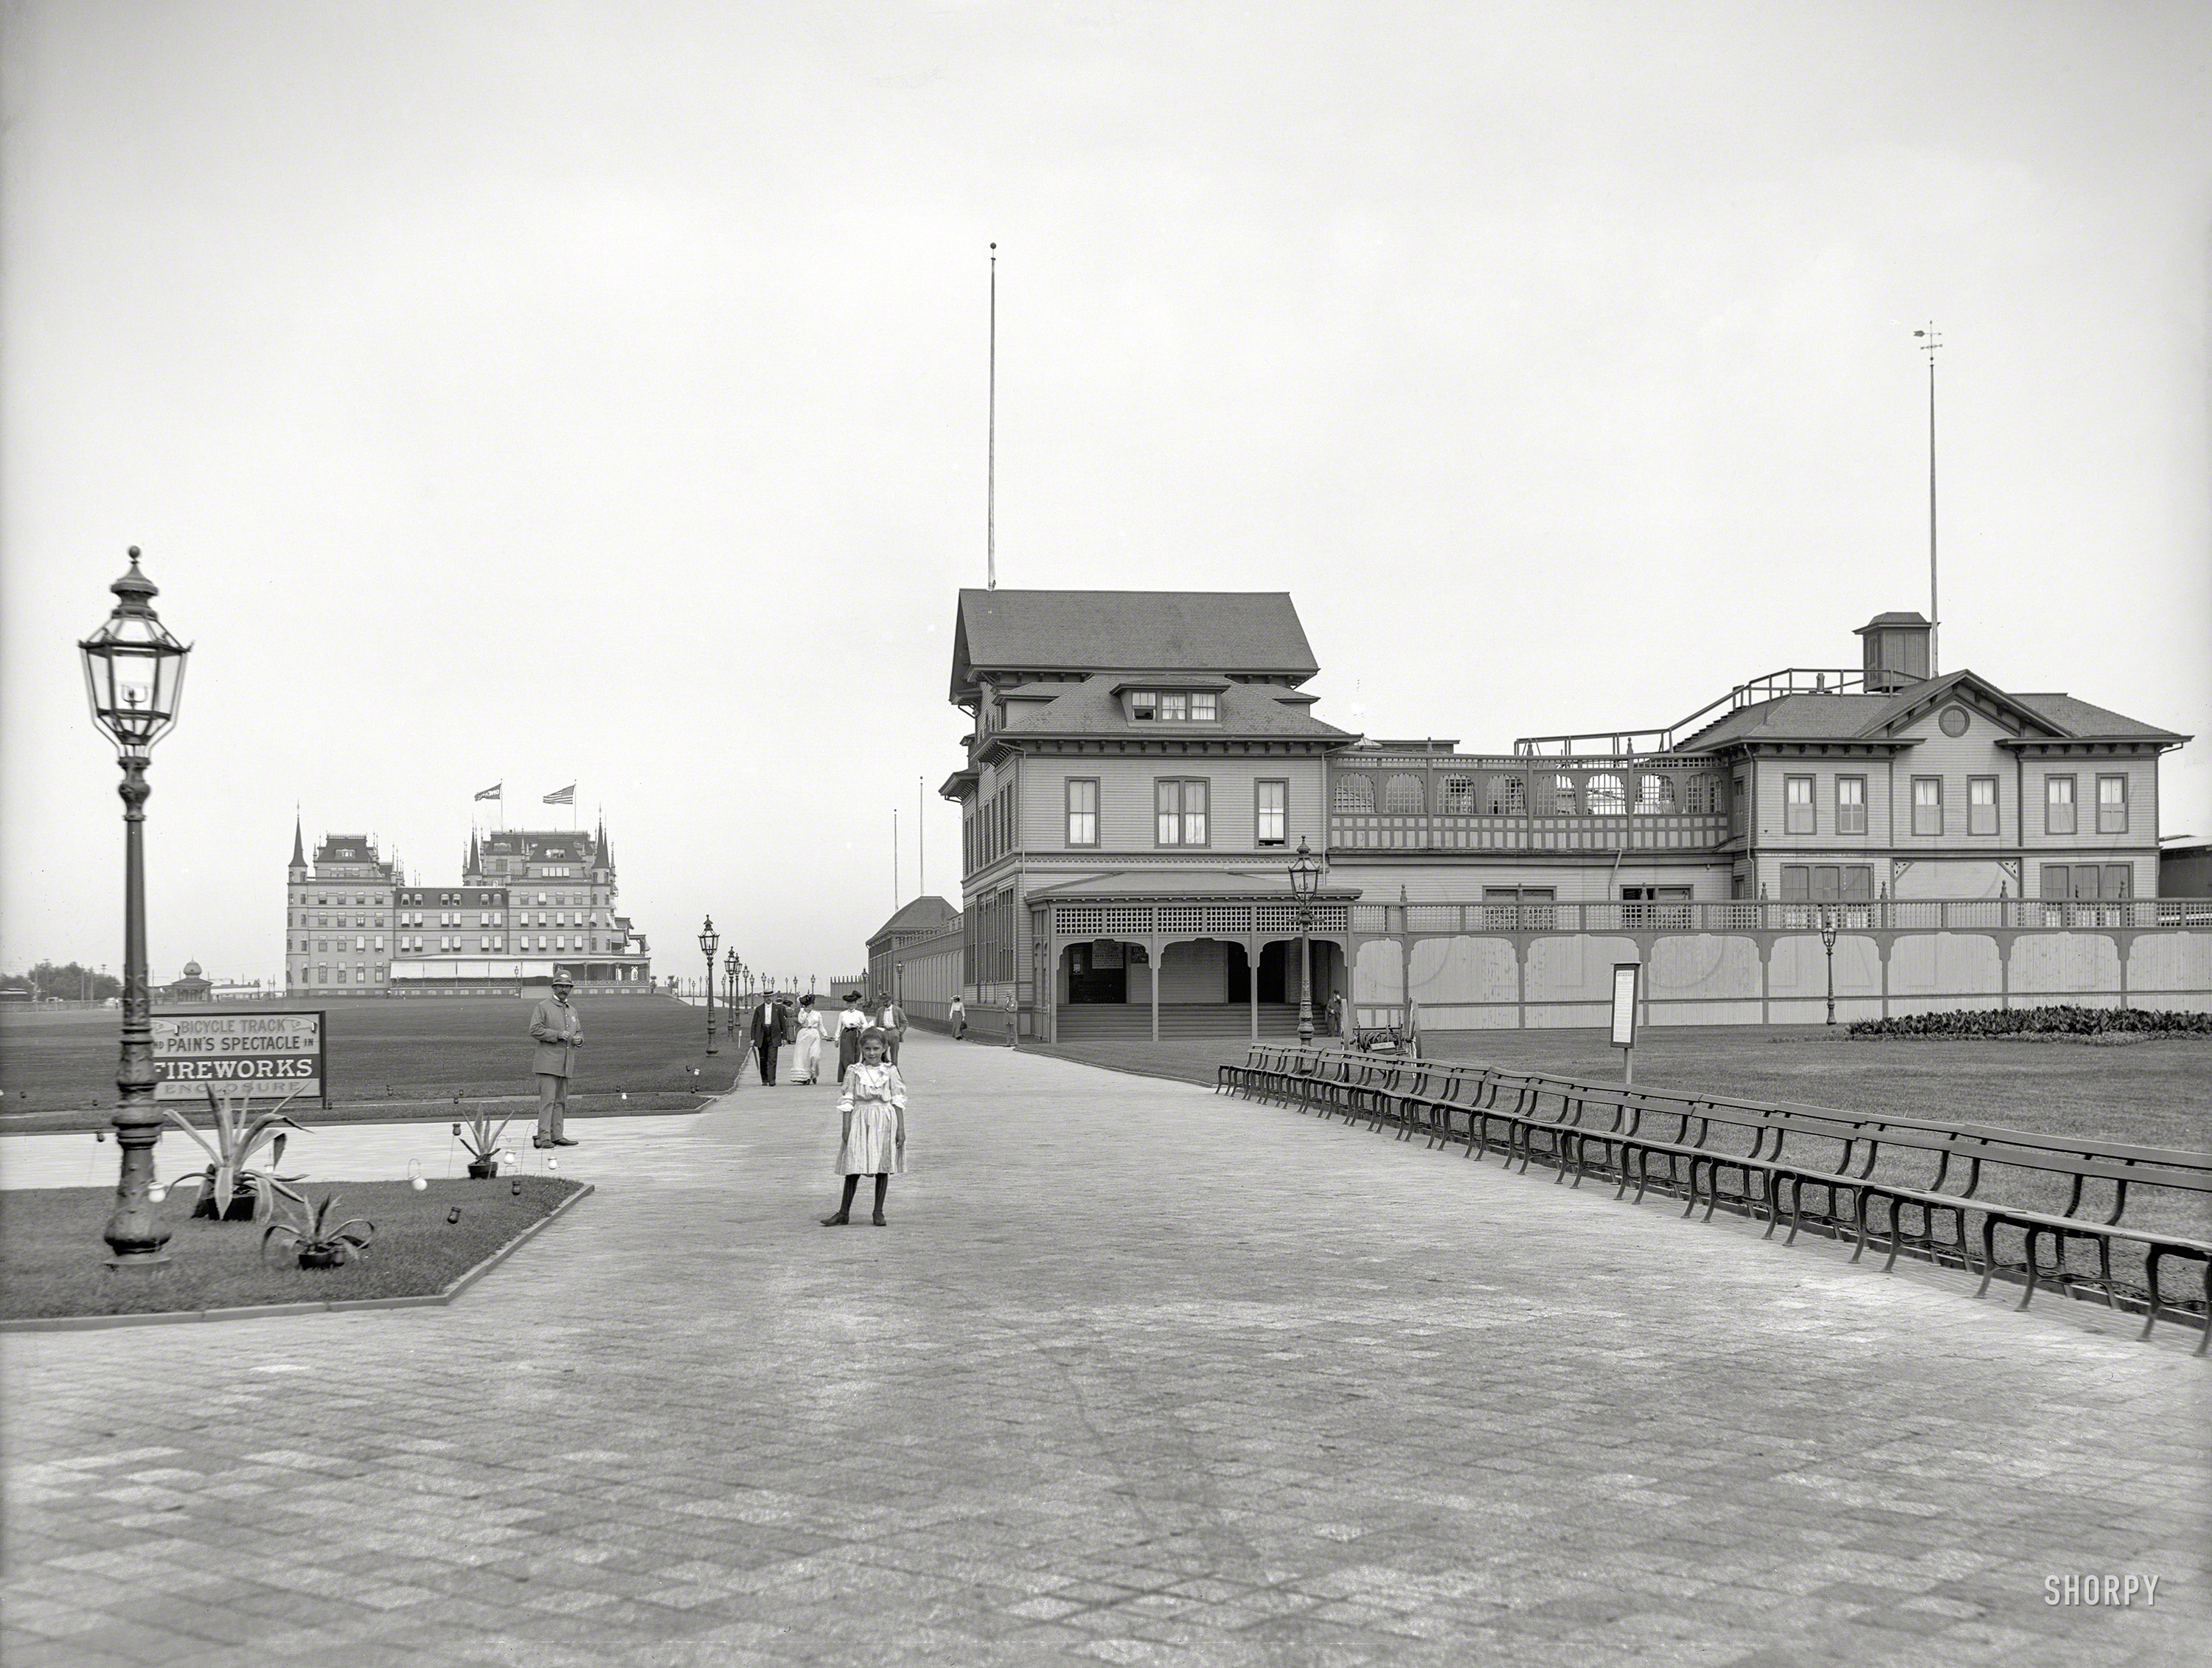 Brooklyn circa 1905. "Oriental Hotel and bath house, Manhattan Beach, N.Y." At left, a sign pointing the way to the bicycle track as well as "Pain's Spectacle in Fireworks." 8x10 inch glass negative, Detroit Publishing Co. View full size.